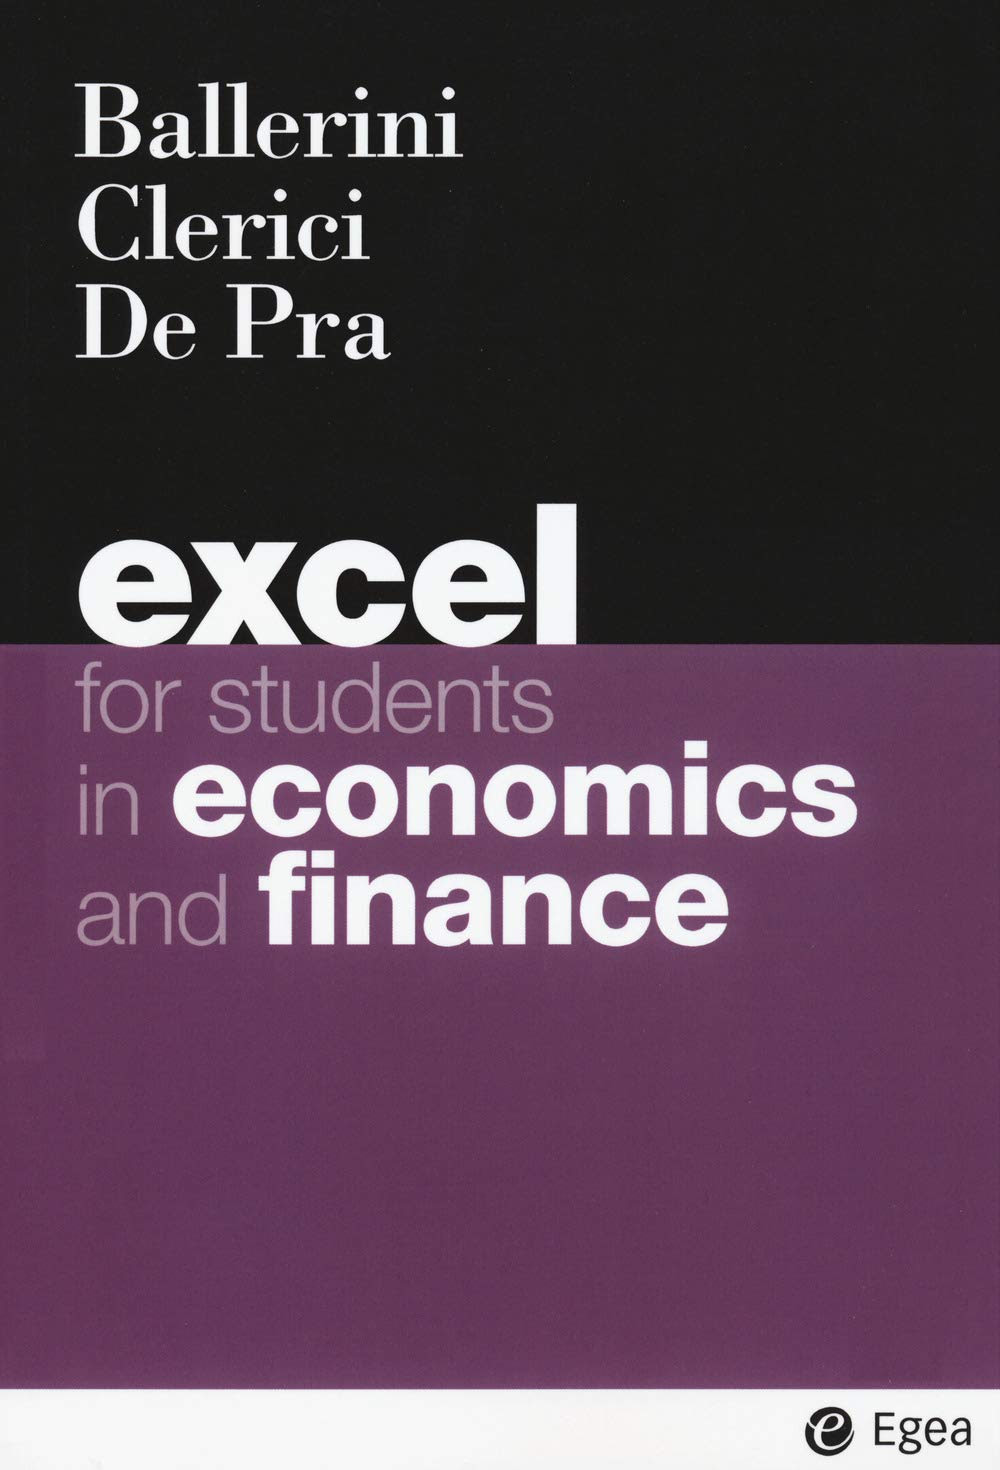 Excel for students in economics and finance in Kindle/PDF/EPUB